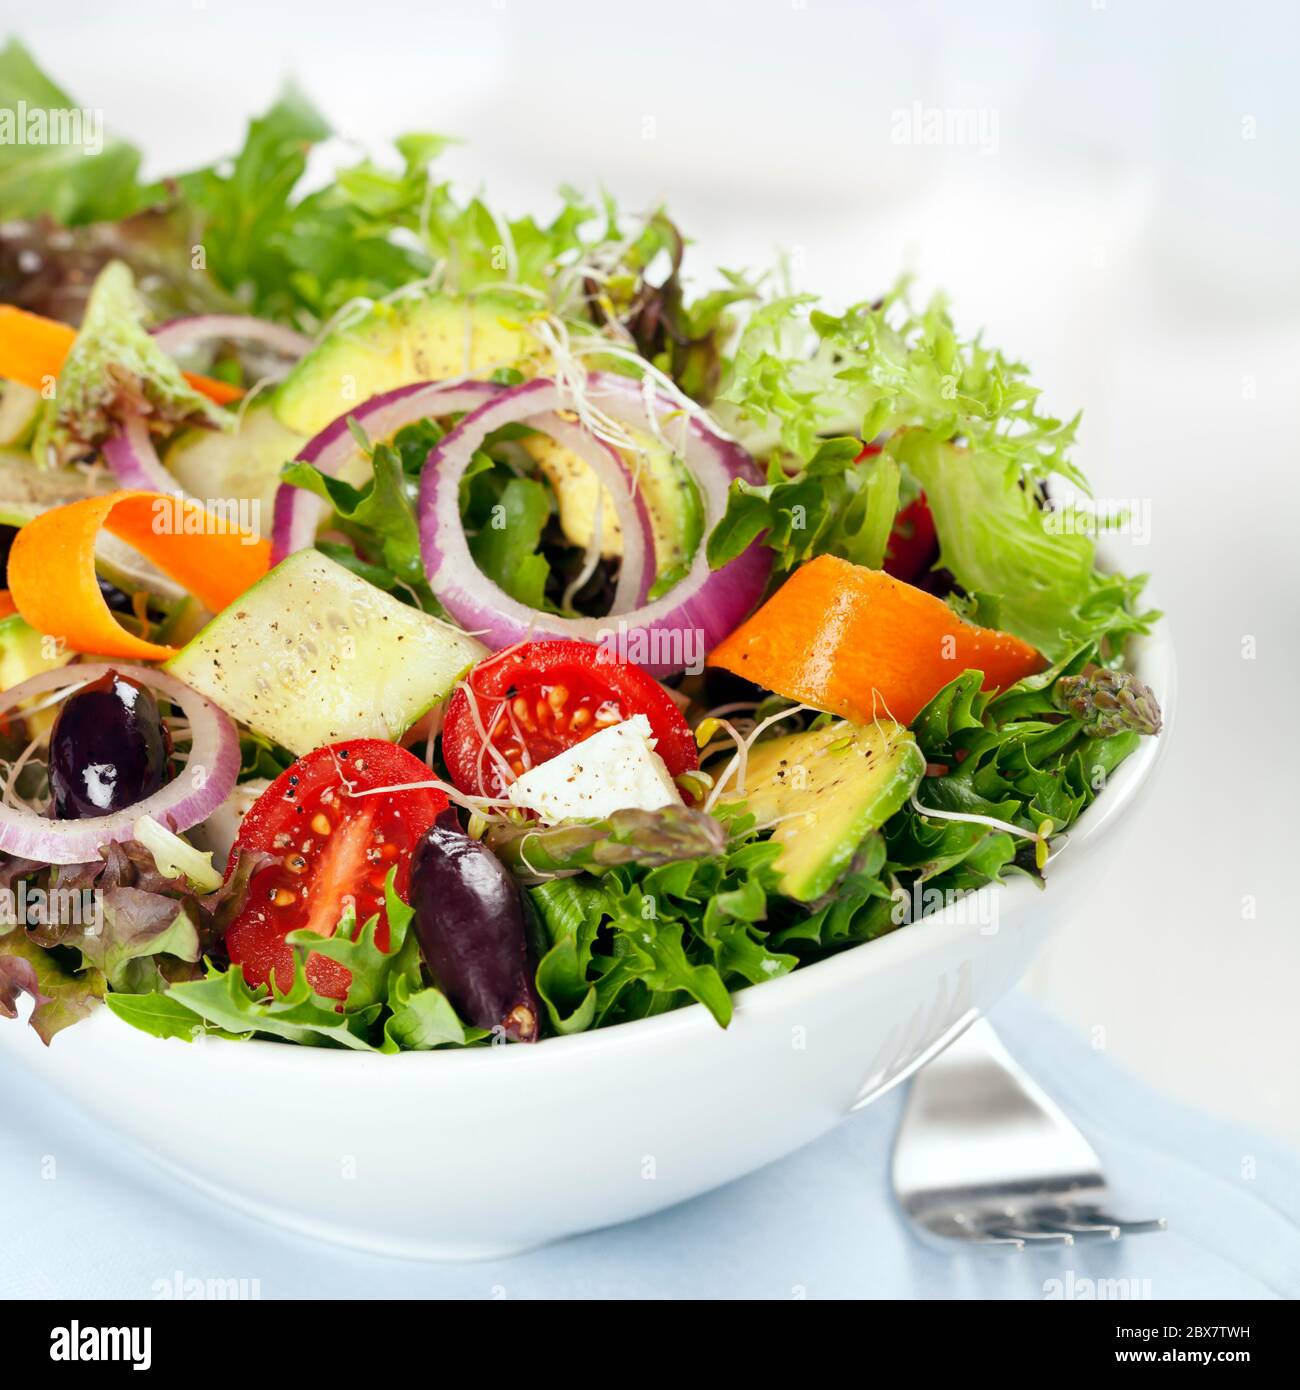 https://c8.alamy.com/comp/2BX7TWH/salad-in-white-bowl-mixed-greens-with-black-olives-tomatoes-and-lots-of-vegetables-2BX7TWH.jpg